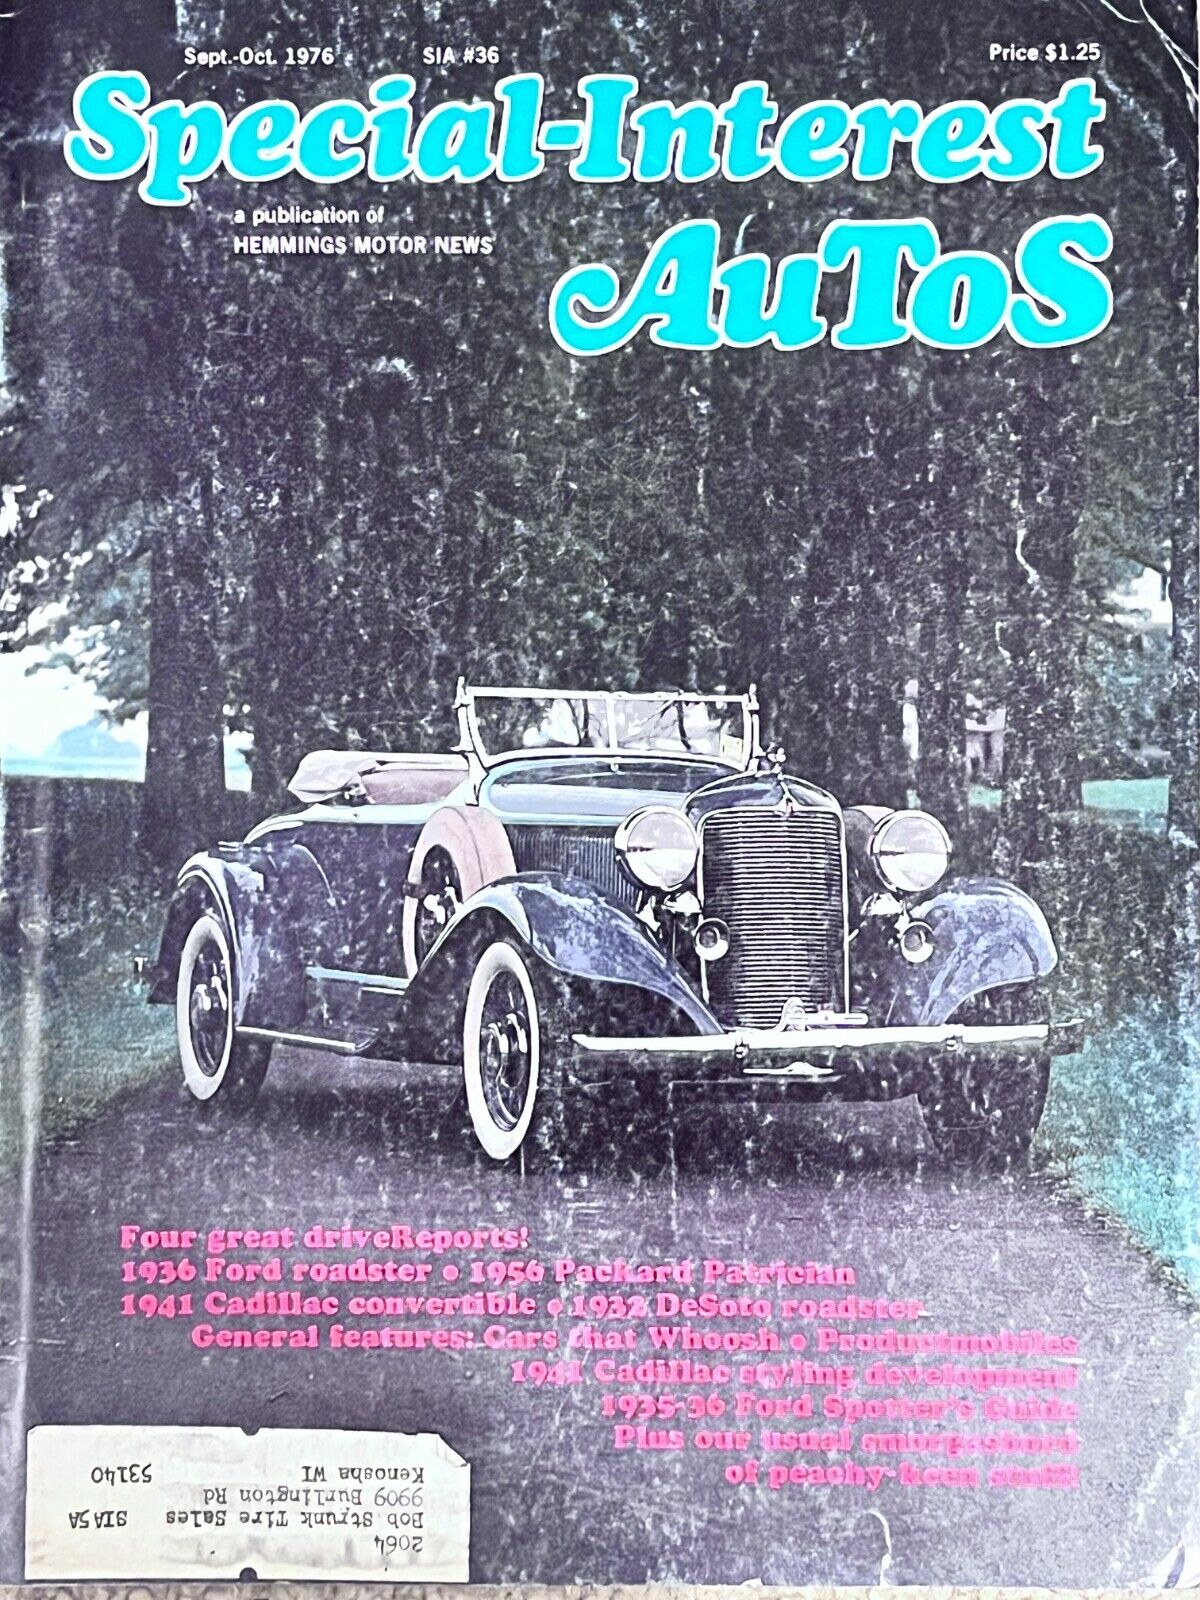 1941 Cadillac Convertible & Styling, 1936 Ford Roadster 1935-36 Spotters Guide